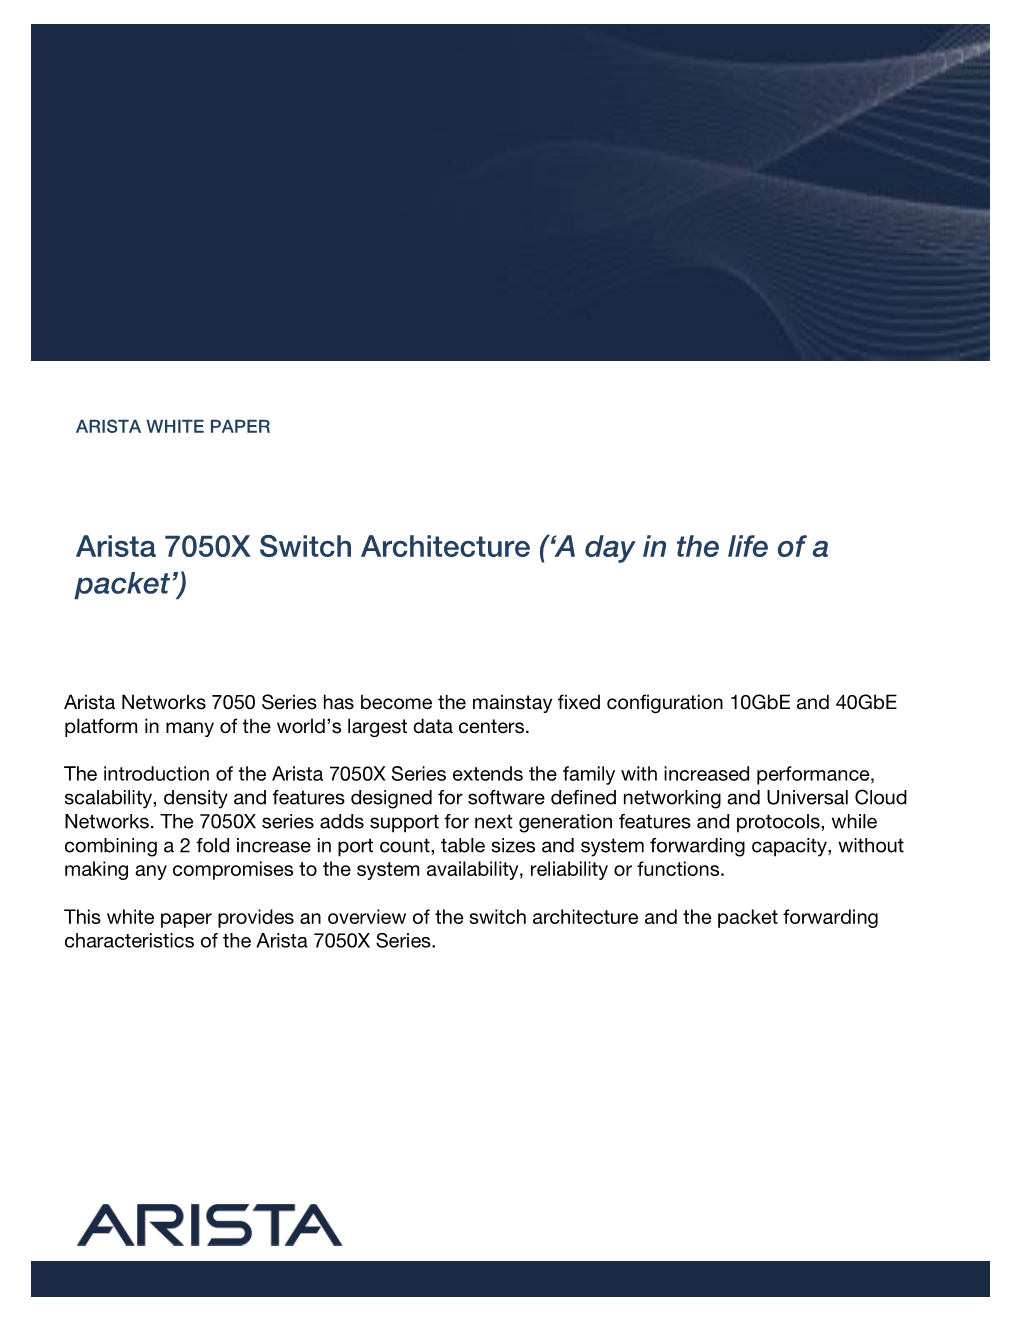 Arista 7050X Switch Architecture ('A Day in the Life of a Packet')